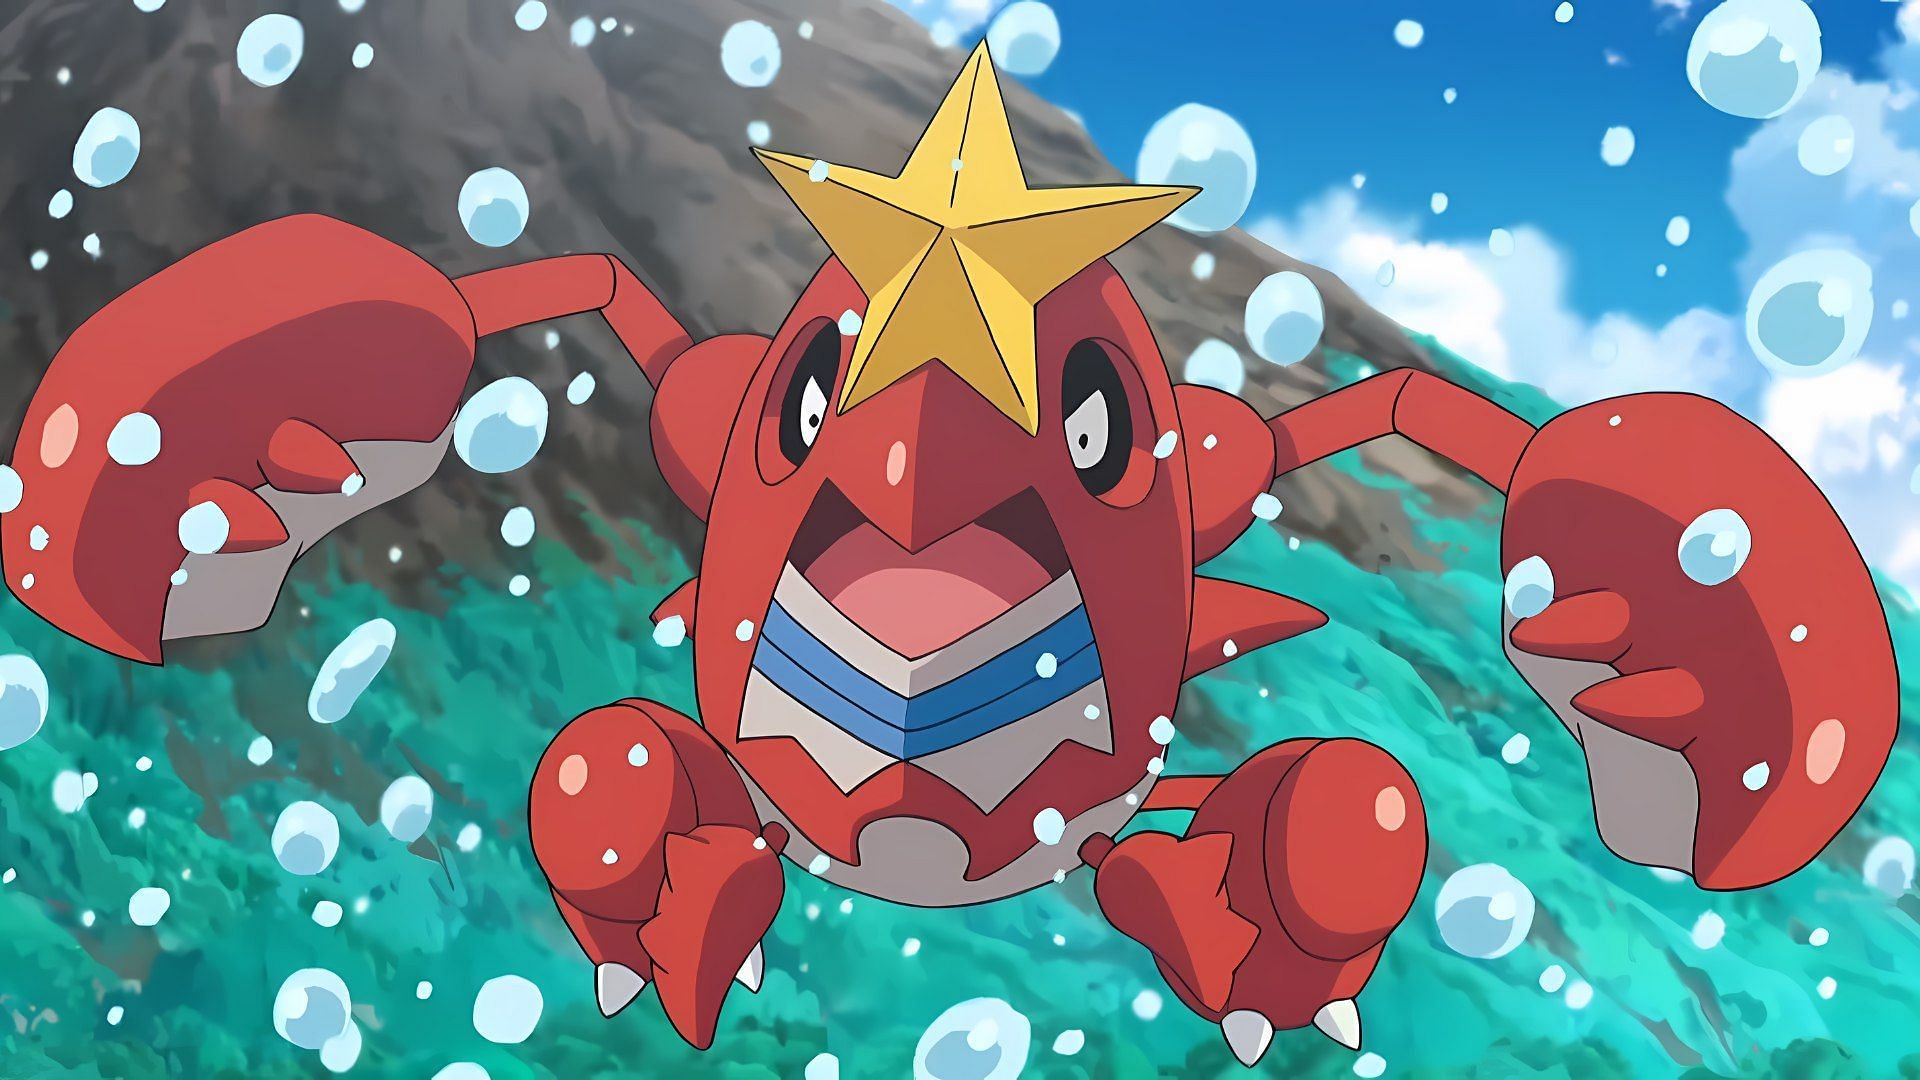 How can you defeat Crawdaunt in Pokemon GO 3-star raids alone?